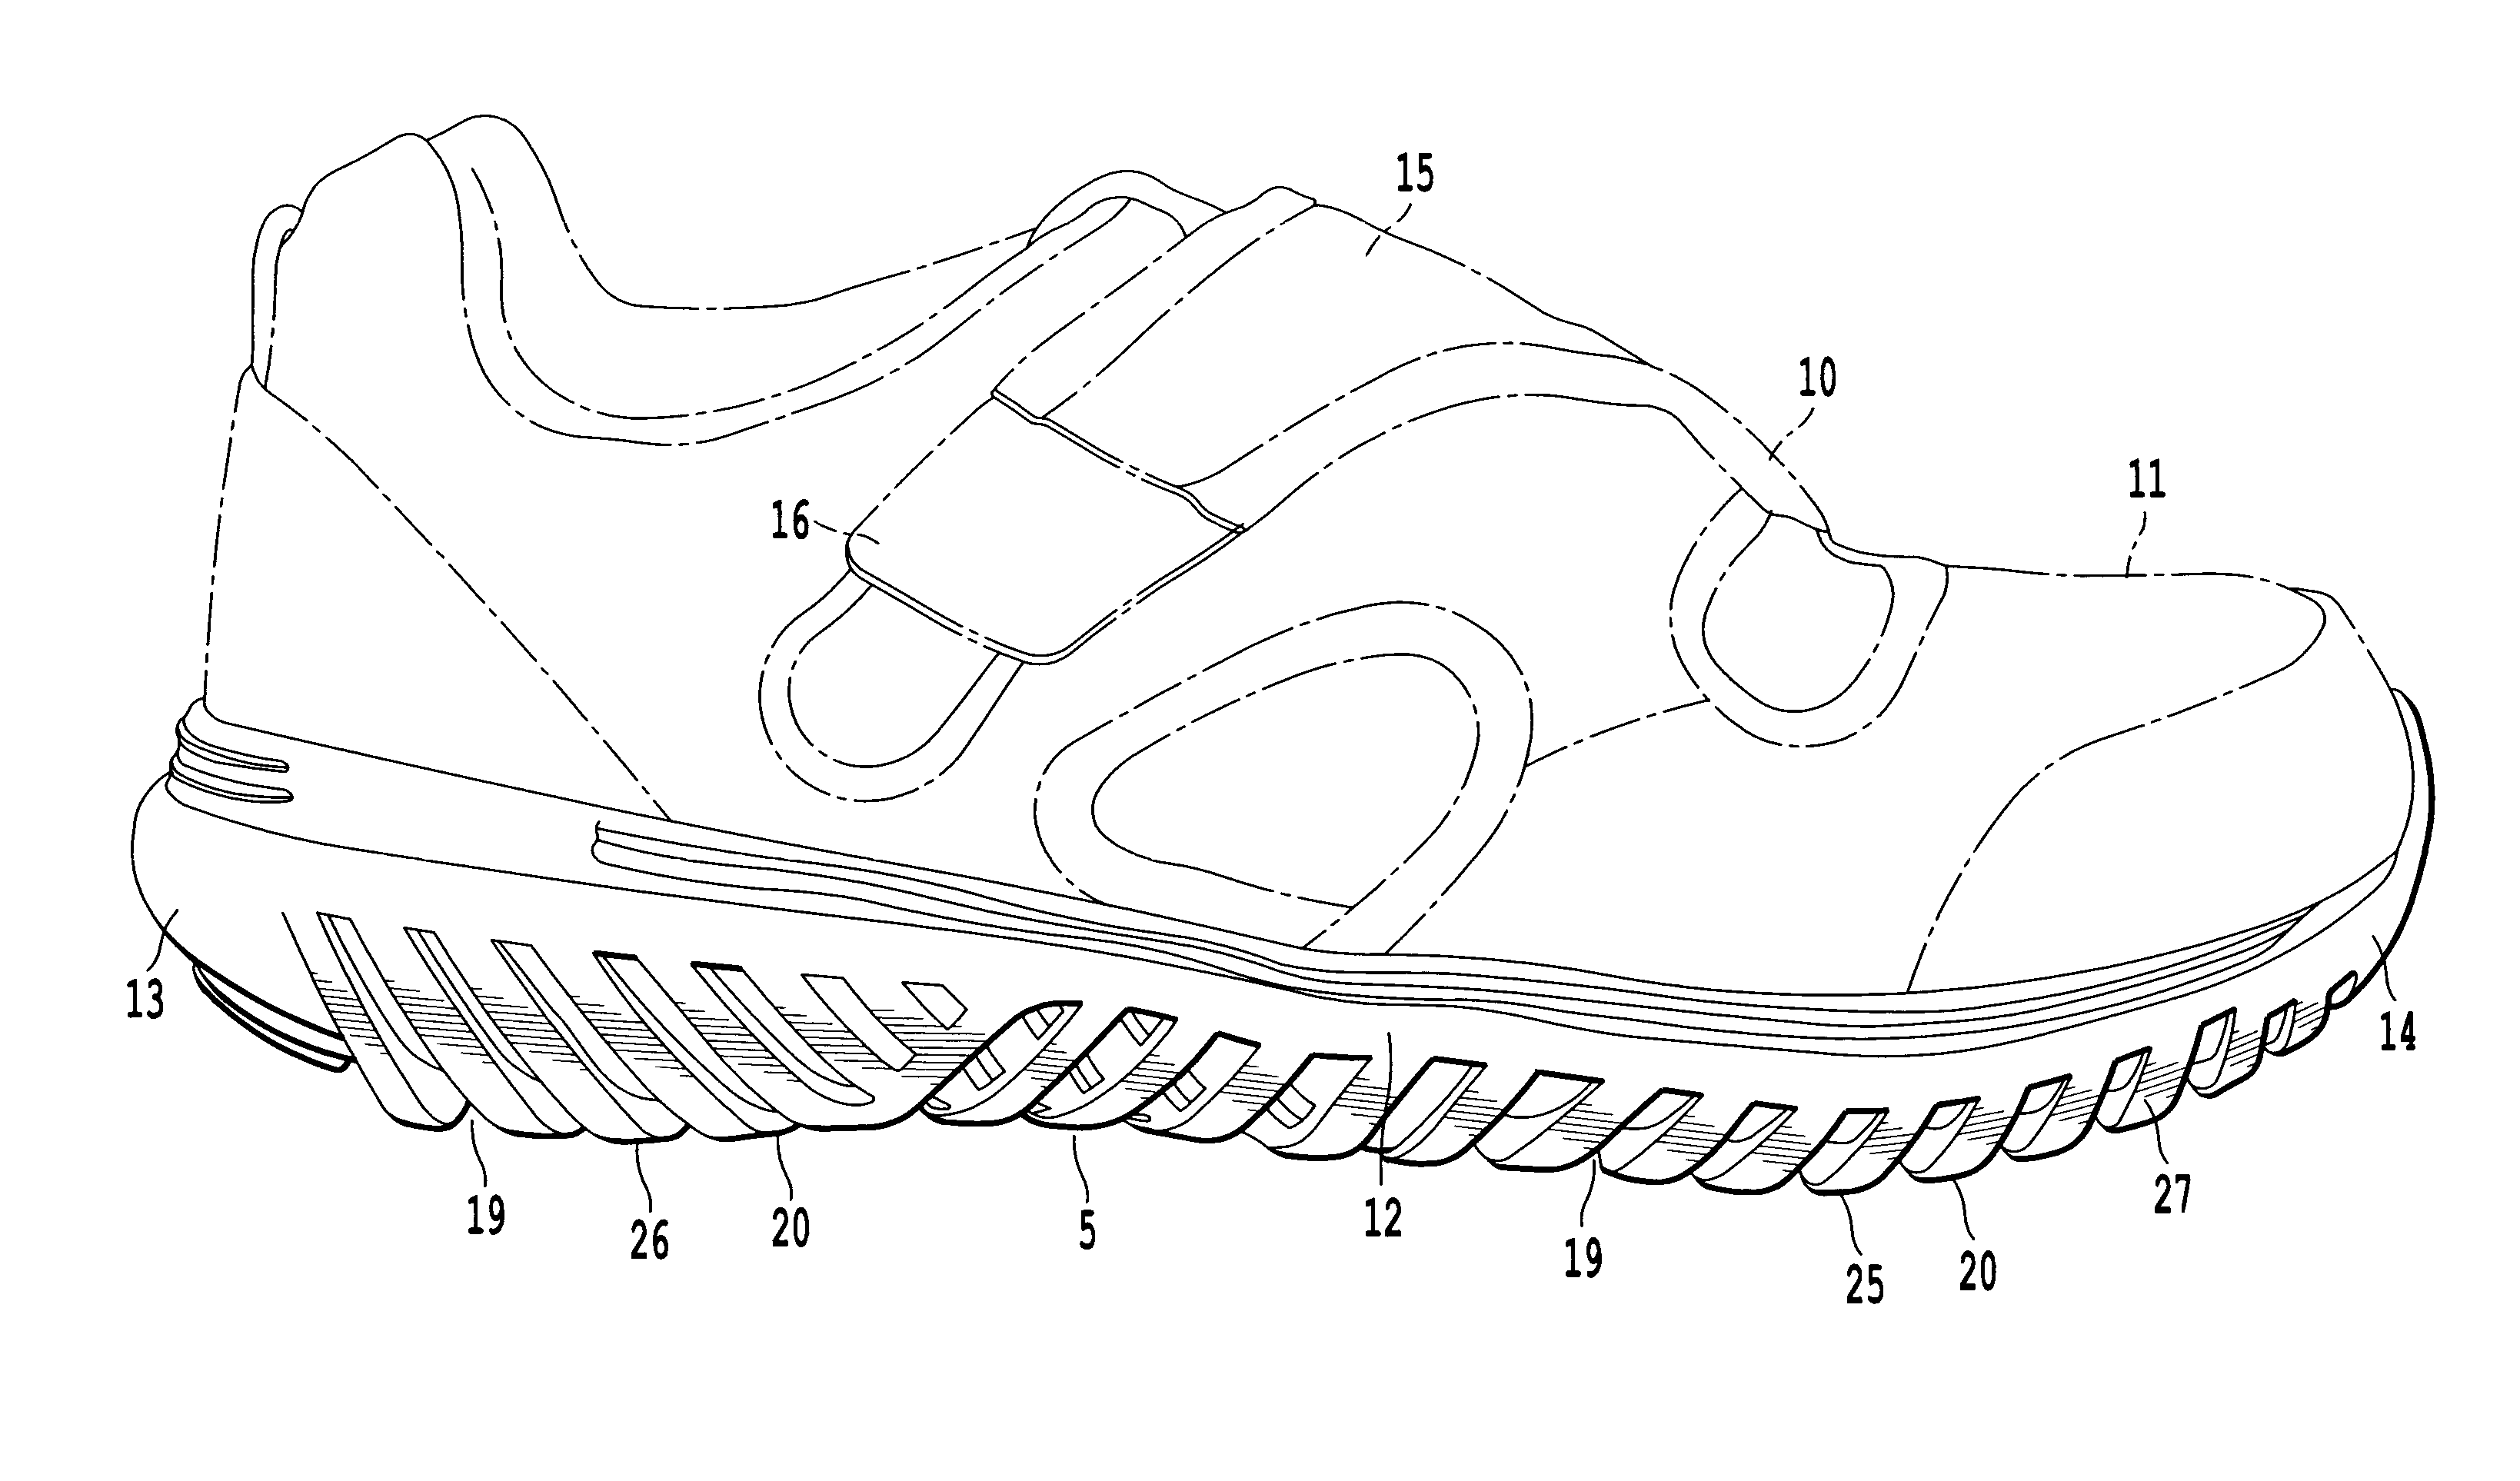 Shoe sole having forwardly and rearwardly facing protrusions